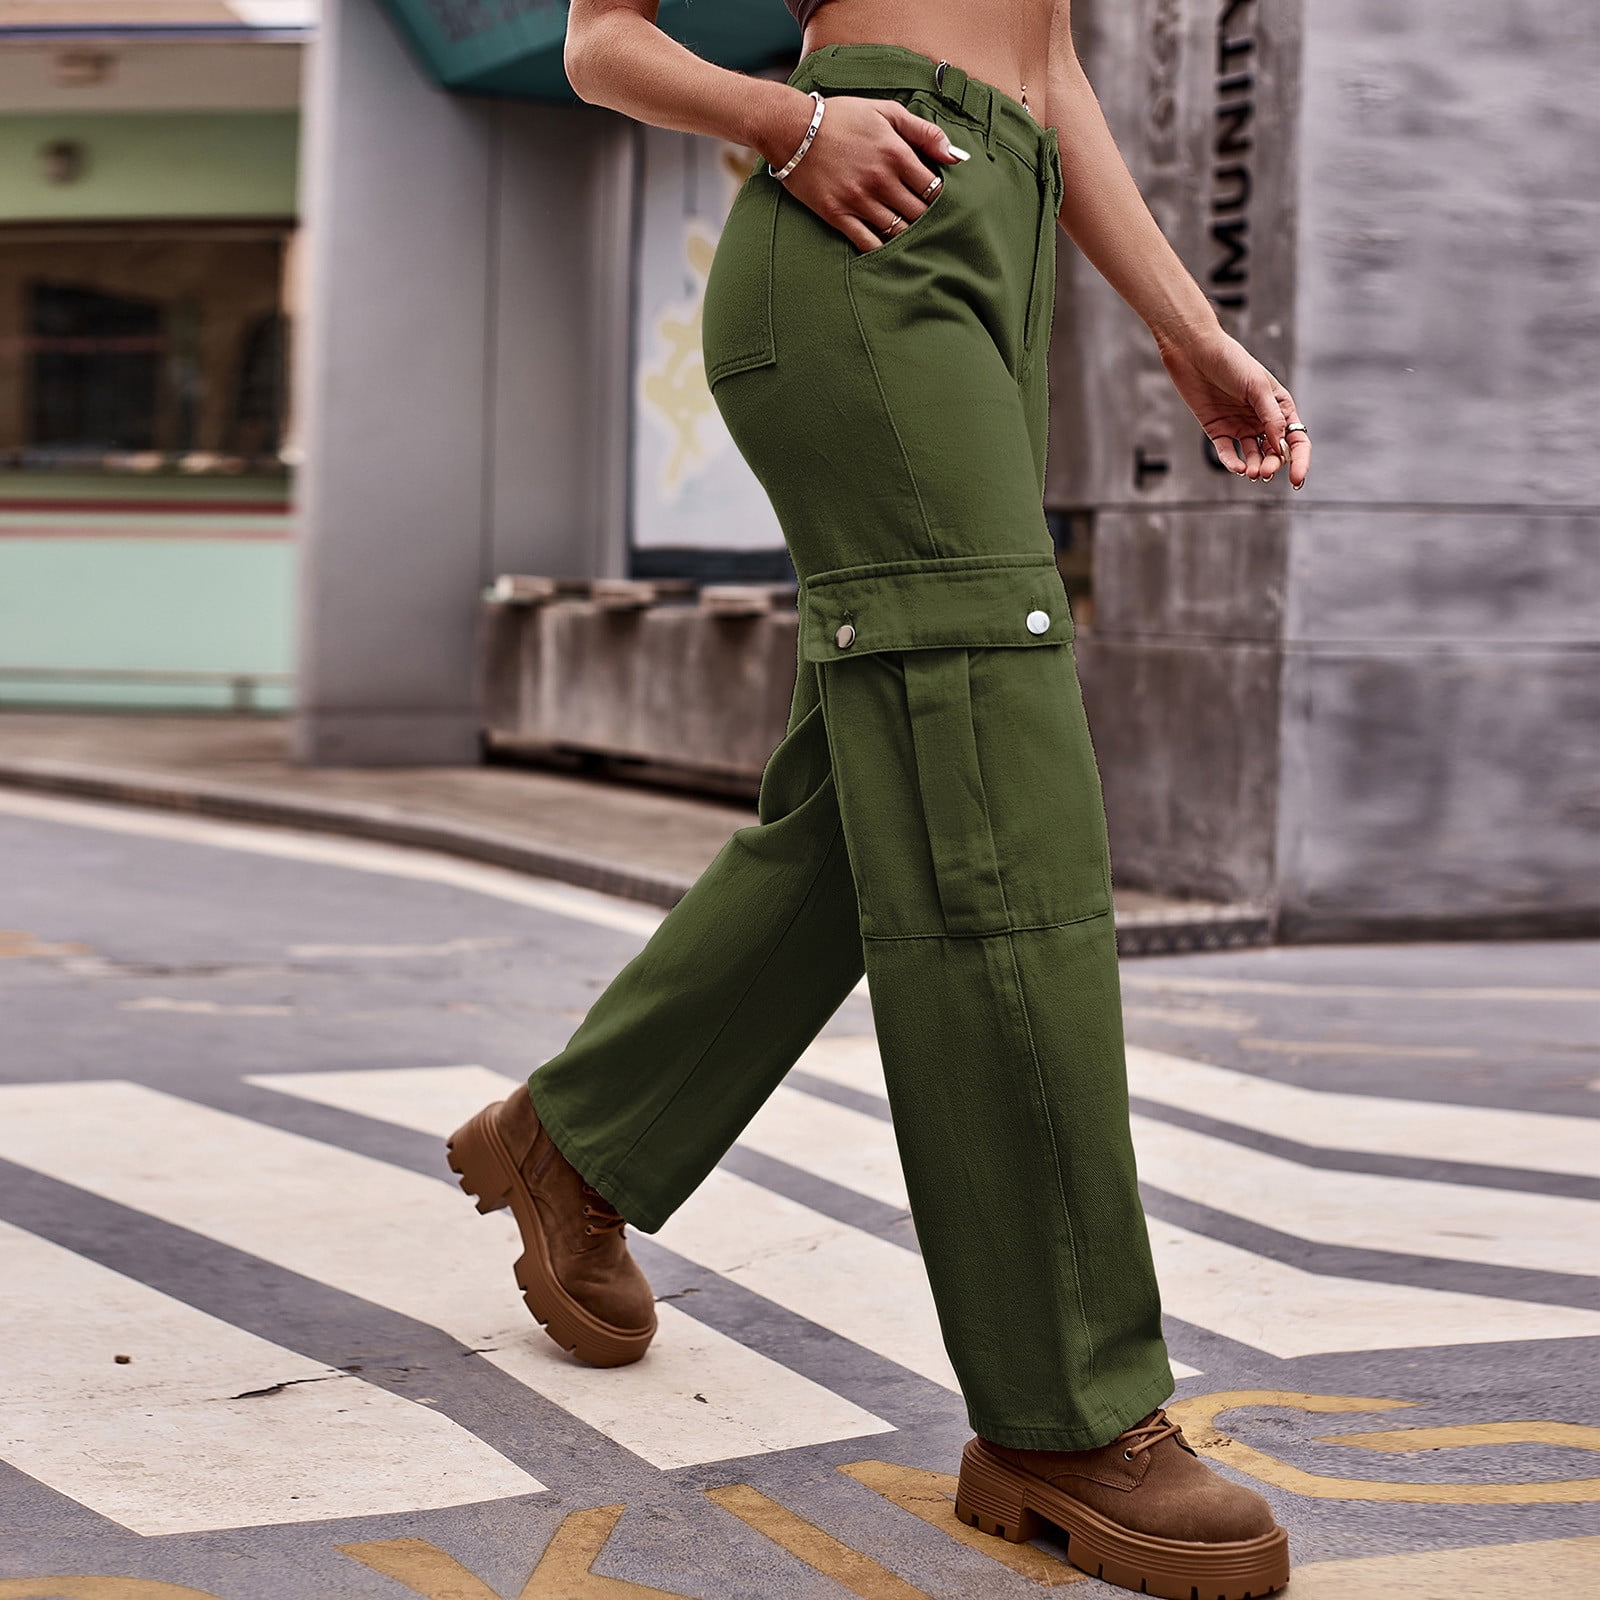 SELONE Cargo Pants Women Sweatpants Women With Pockets Denim Casual Summer  Long Pant Mid-waist Overalls Pants In Spring And for Everyday Wear Running